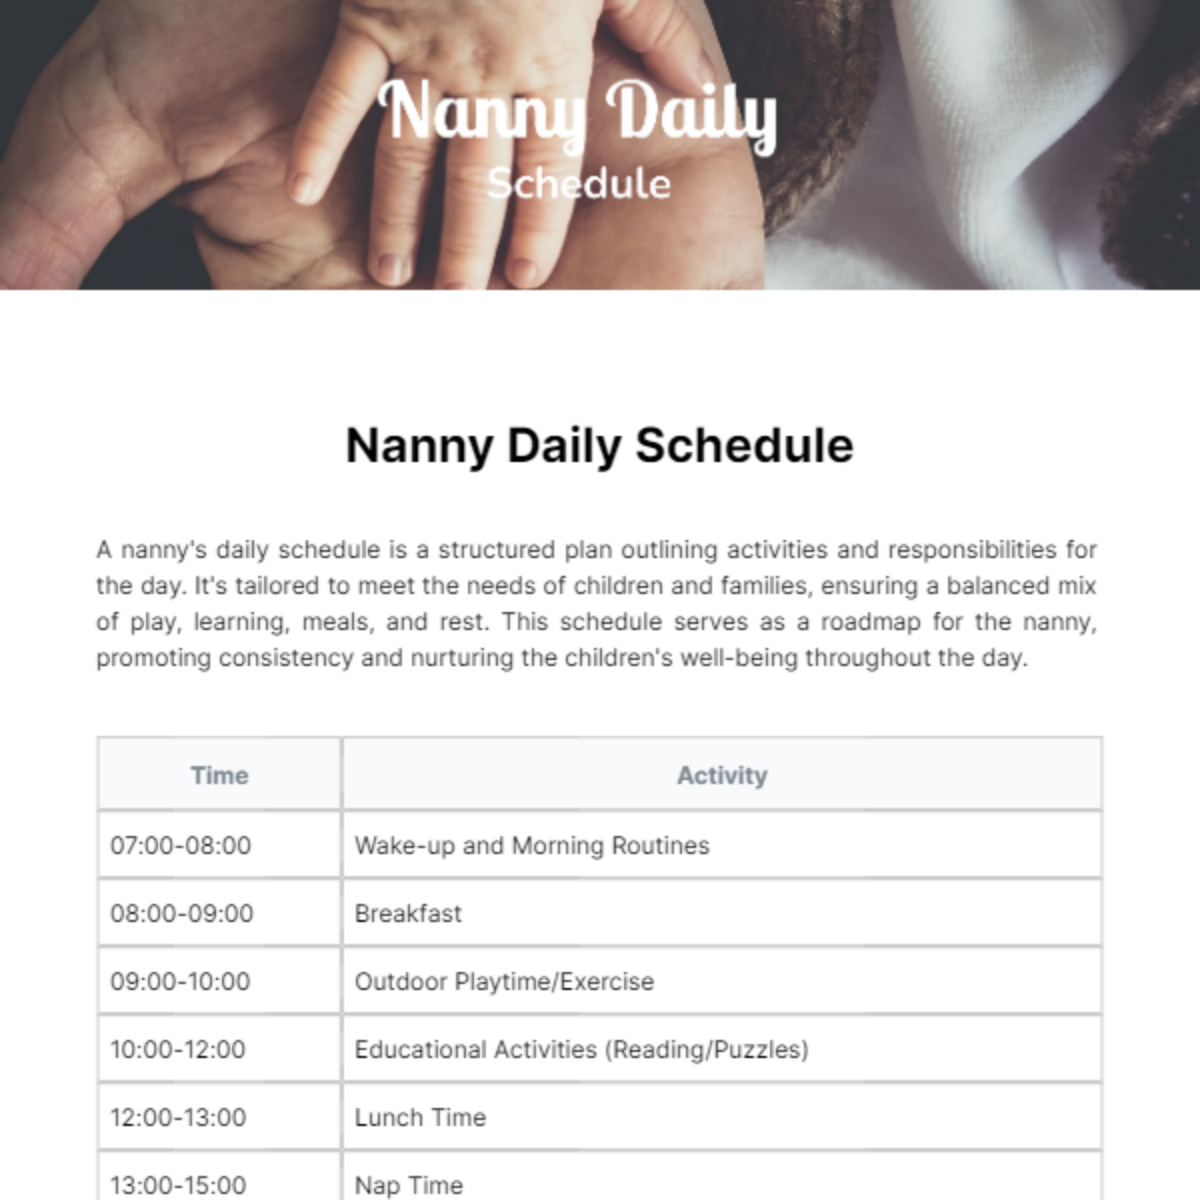 Nanny Daily Schedule Template